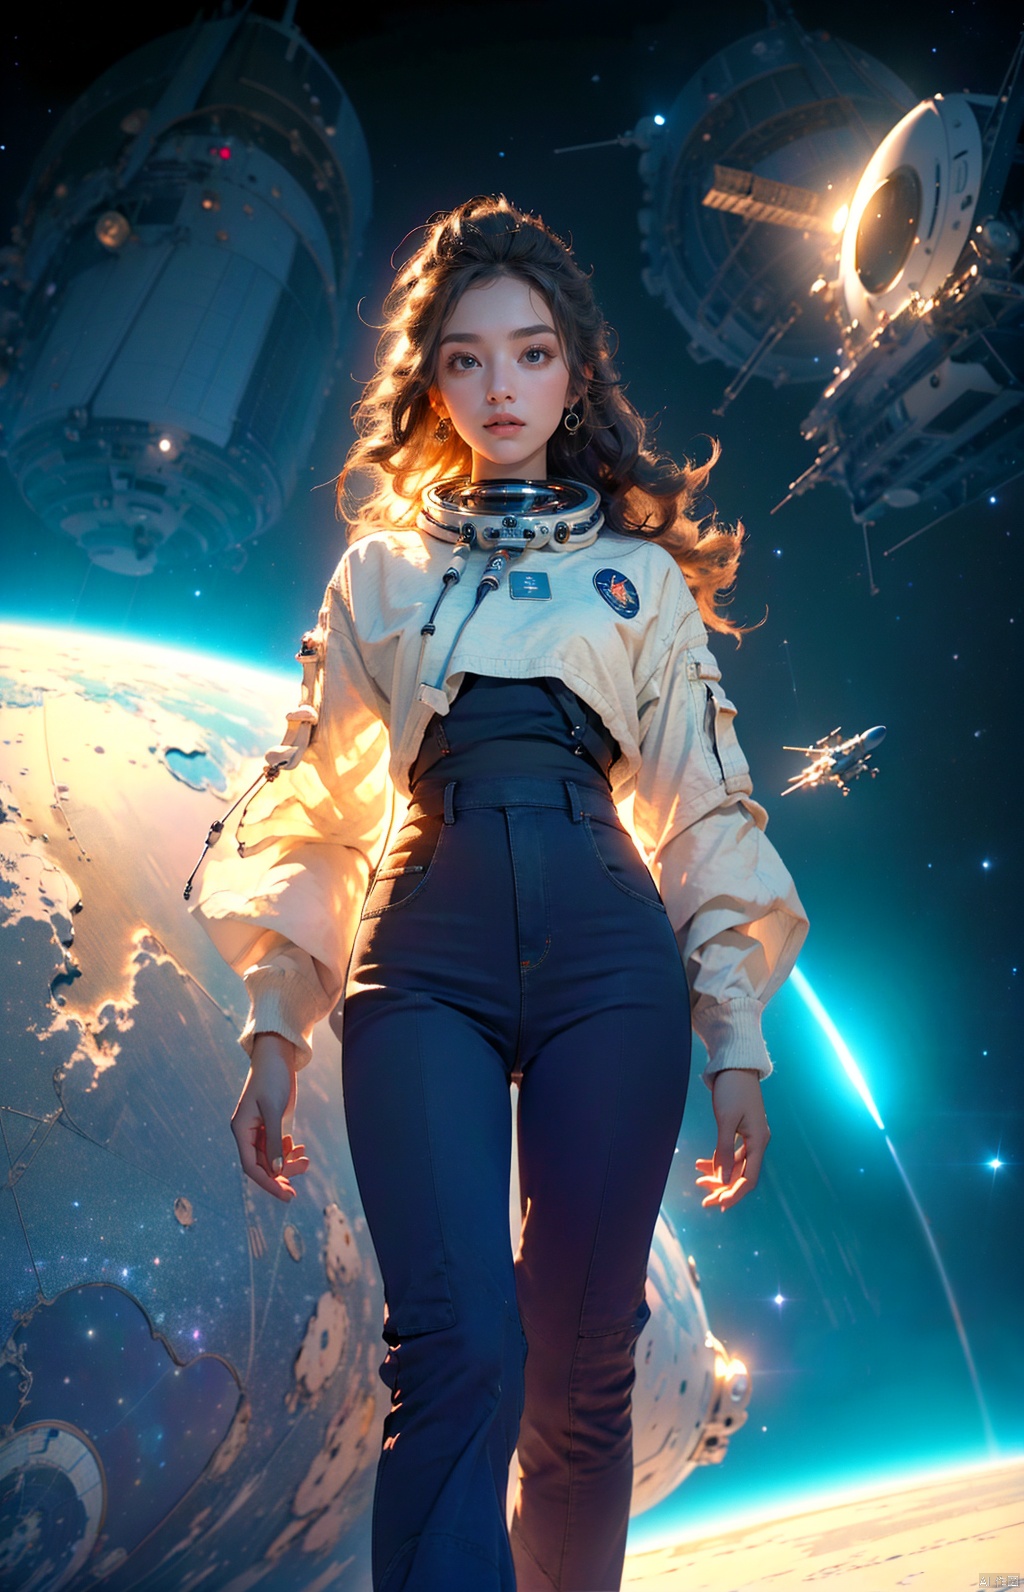  (((masterpiece))), best quality,realistic,(best quality), {{masterpiece}}, {highres}, original, extremely detailed 8K wallpaper),

1 girl, solo, (Spacecraft engineer: 1.1), designing and constructing highly detailed spacecraft for interstellar exploration, her blueprints and engineering plans reflecting her commitment to precision and safety, pushing the boundaries of space travel.